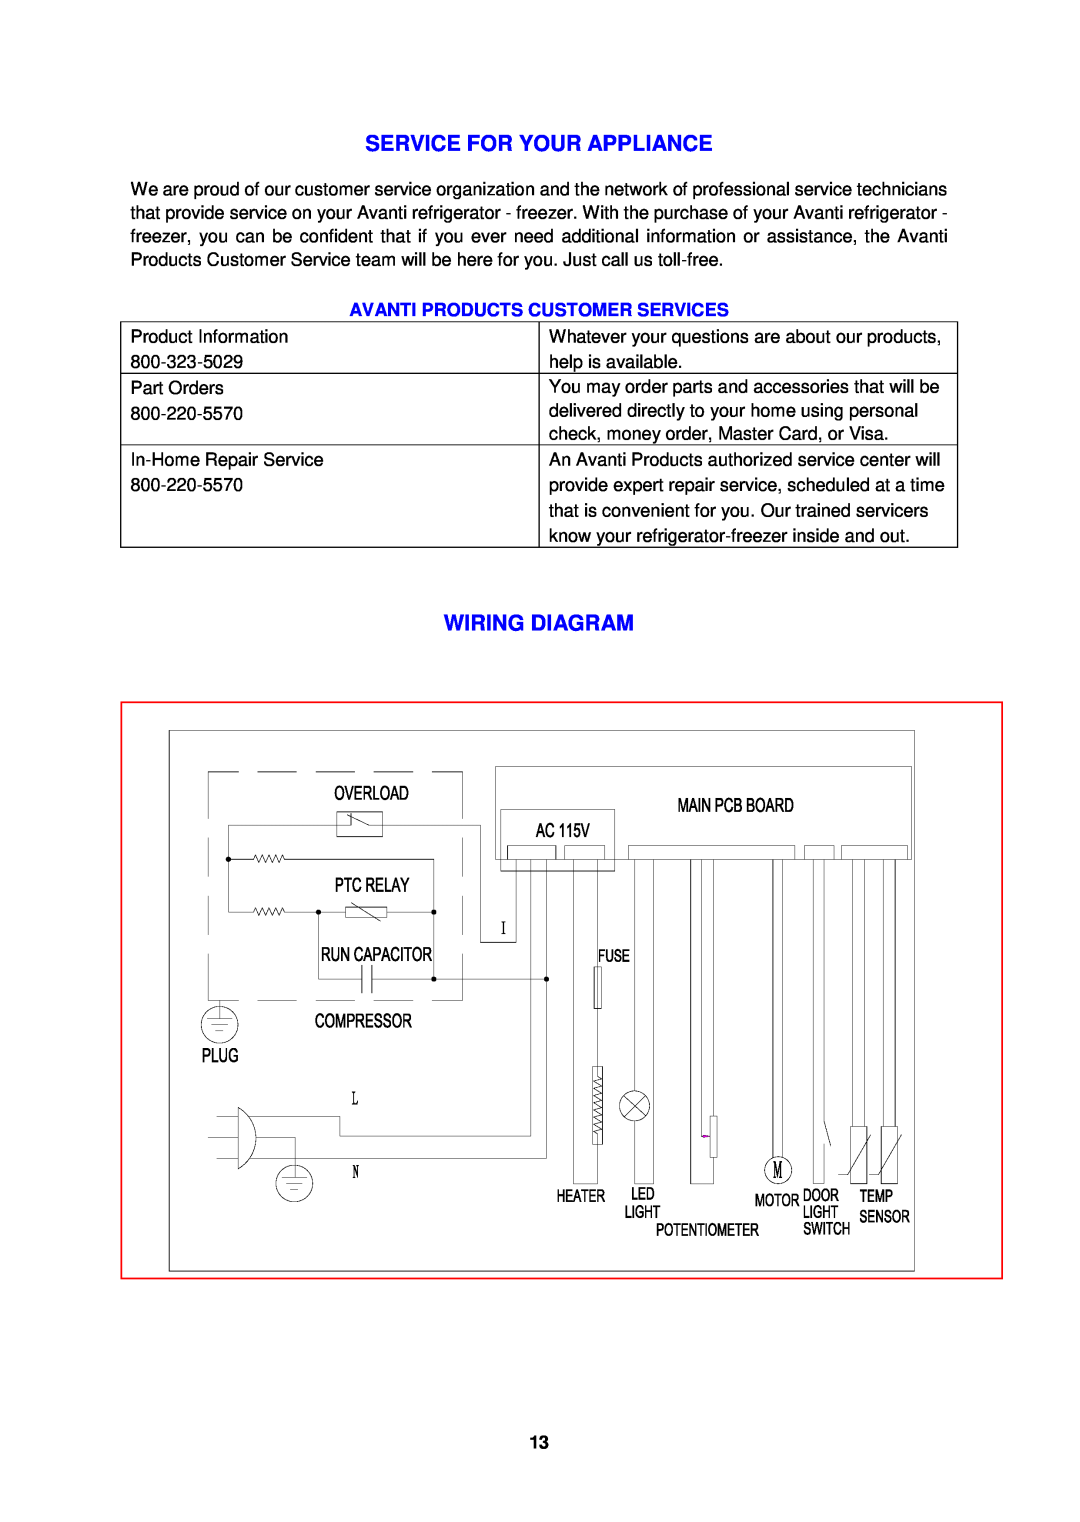 Avanti FFBM921PS, FFBM920W instruction manual Service For Your Appliance, Wiring Diagram, Avanti Products Customer Services 